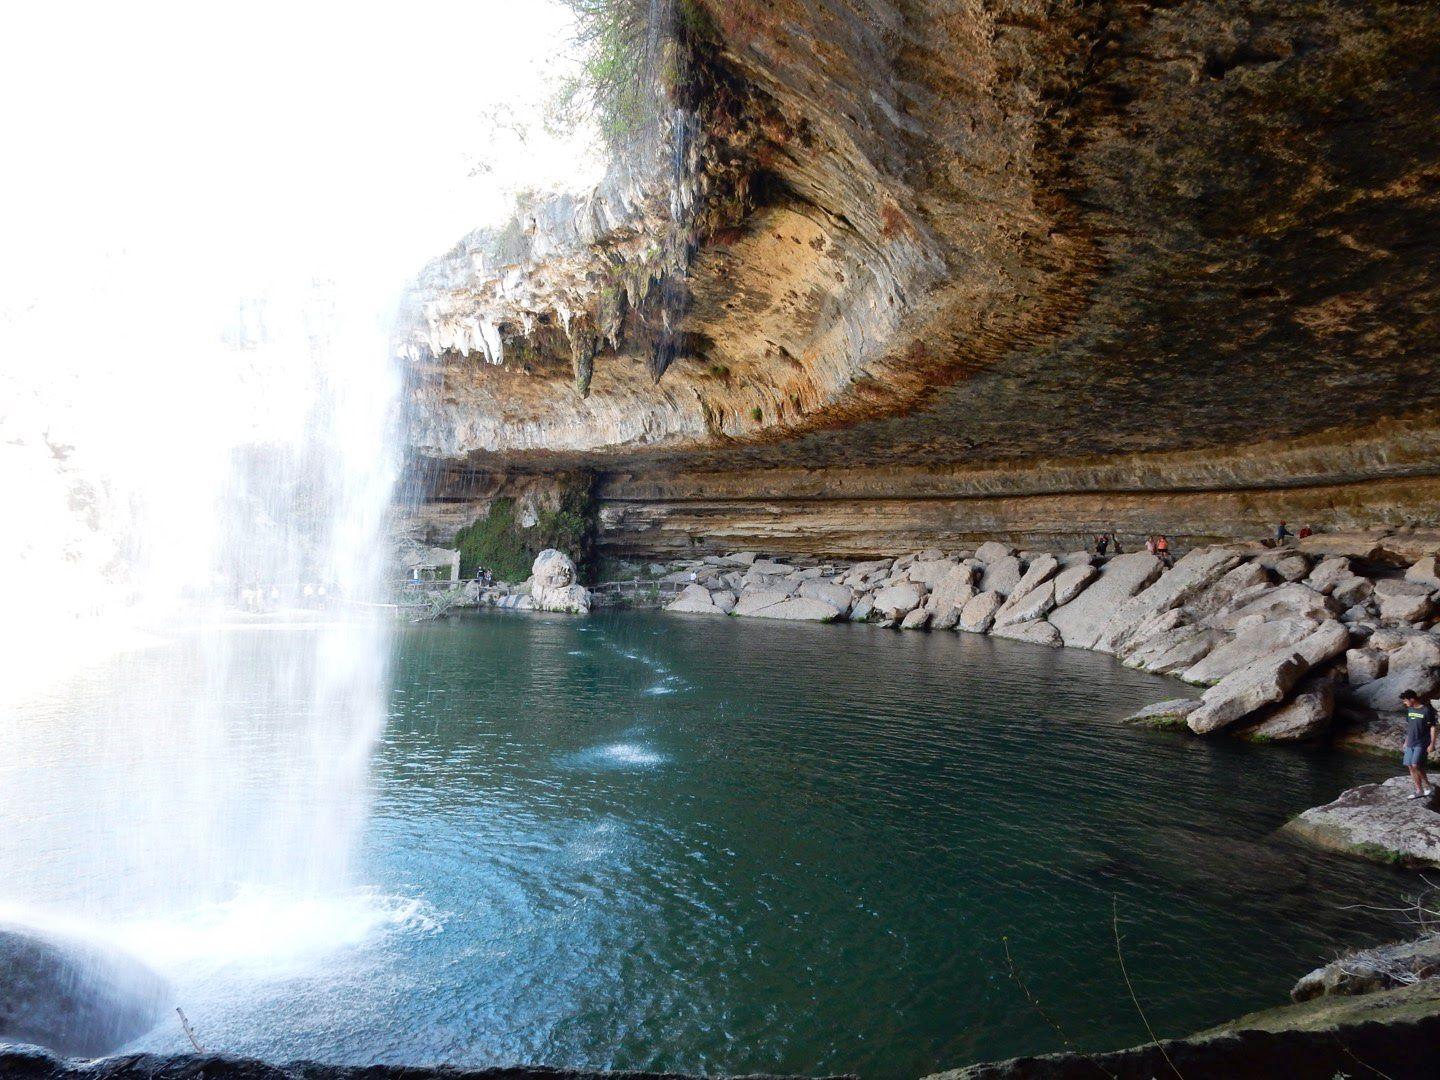 The large alcove of Hamilton Pool Preserve. Water cascades over the rim and into the pool of water below.